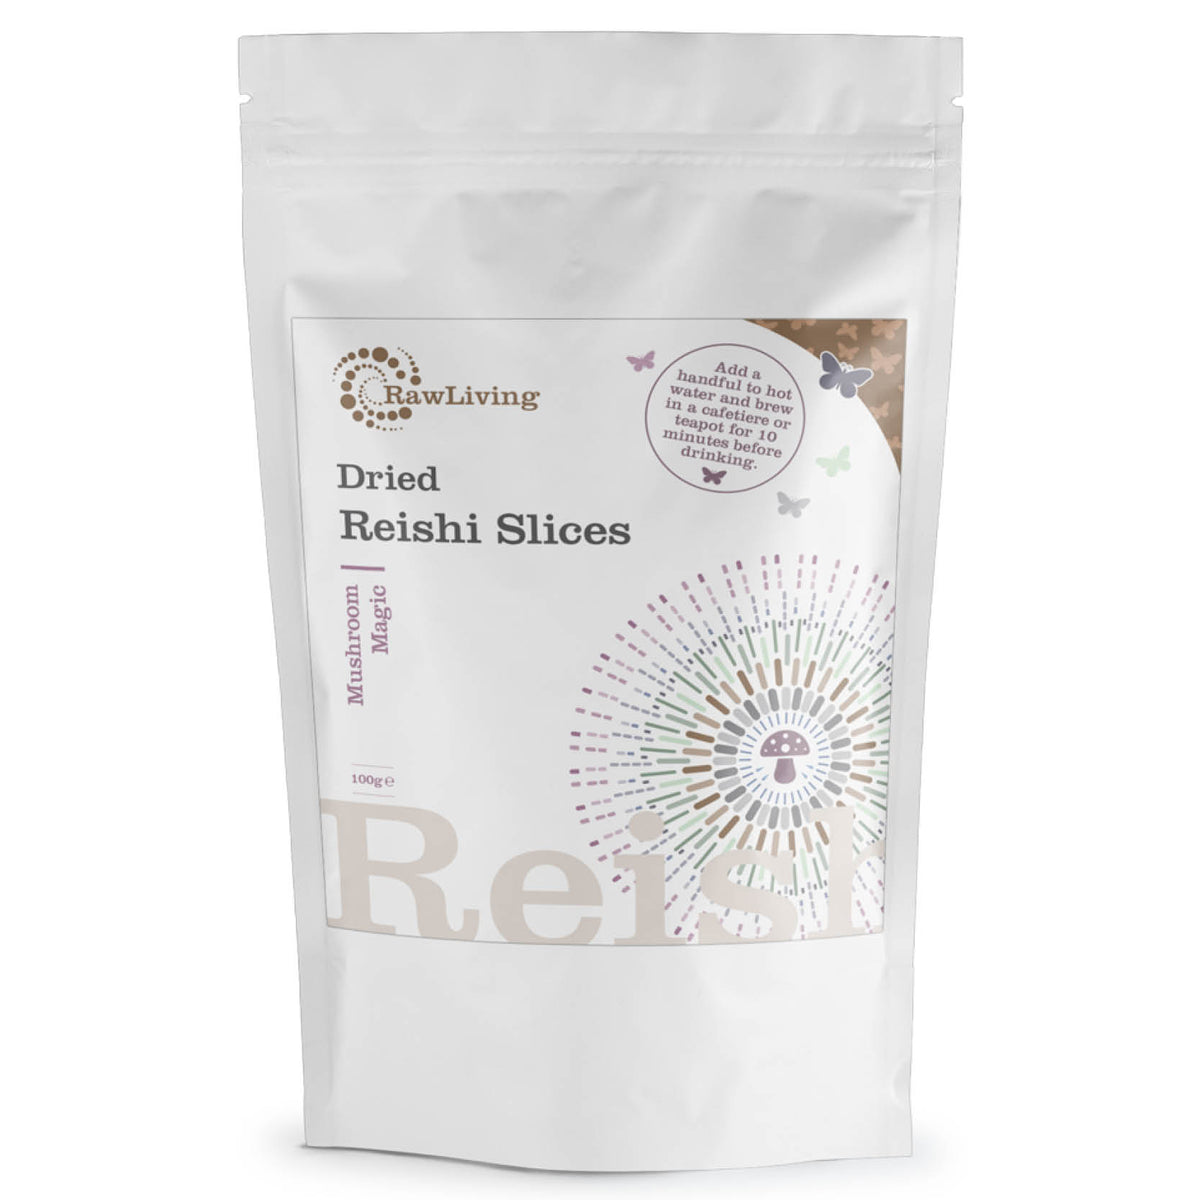 Dried Reishi Slices | Raw Living UK | Mushroom Products | Raw Living Dried Reishi Slices are grown organically on real linden logs (the natural growing substrate for Reishi). Use in tea and other culinary creations!